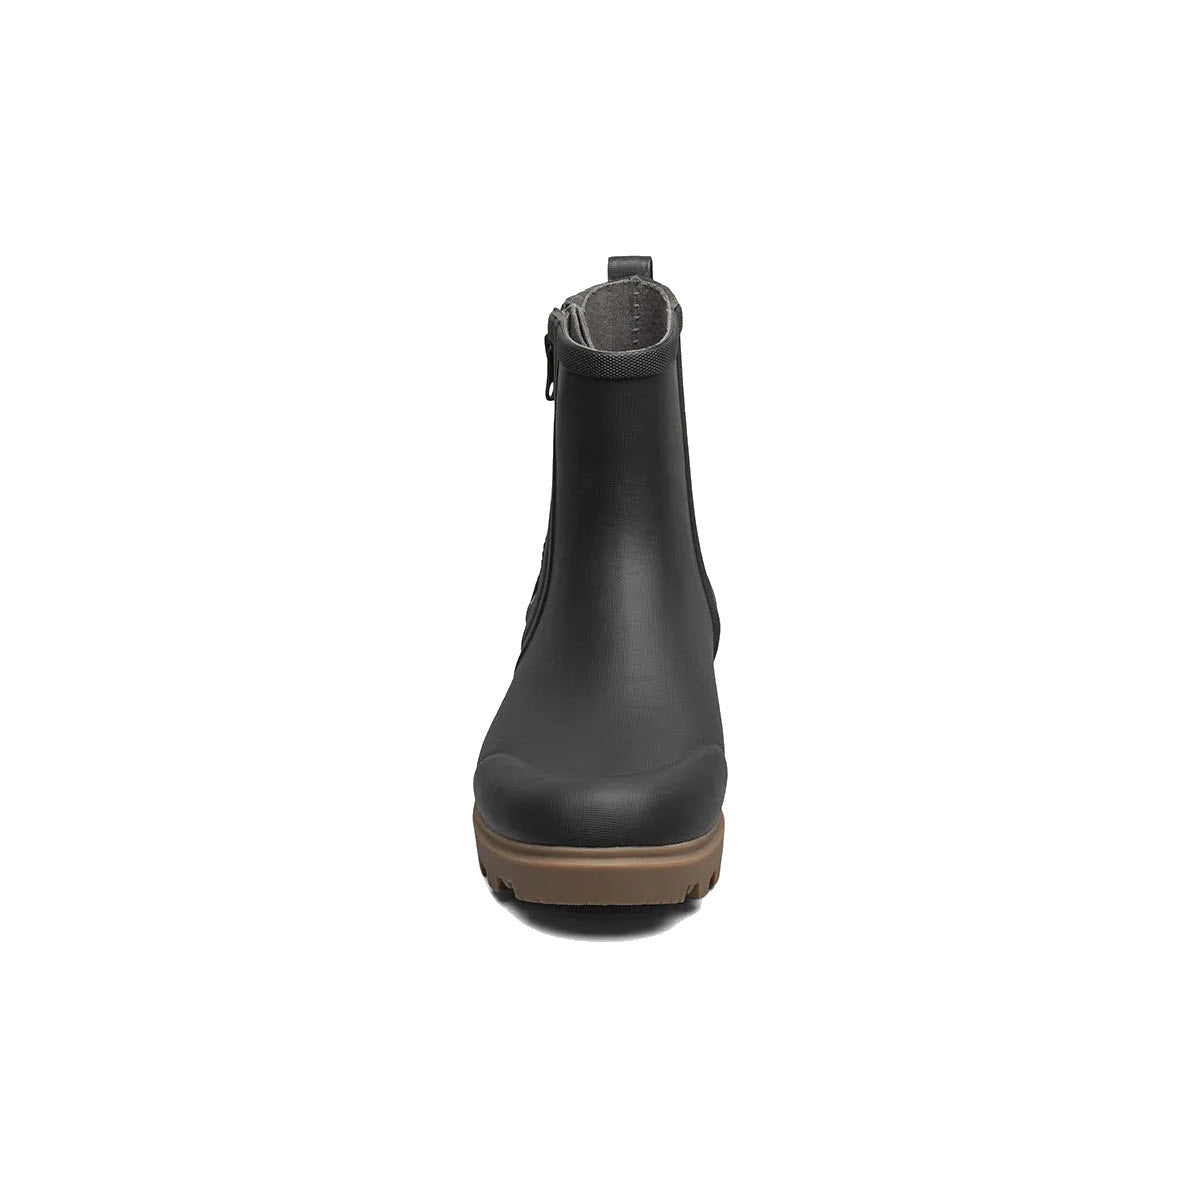 A single Bogs Holly Rain Zip Black - Womens boot with a brown, waterproof sole, viewed from the front against a white background.